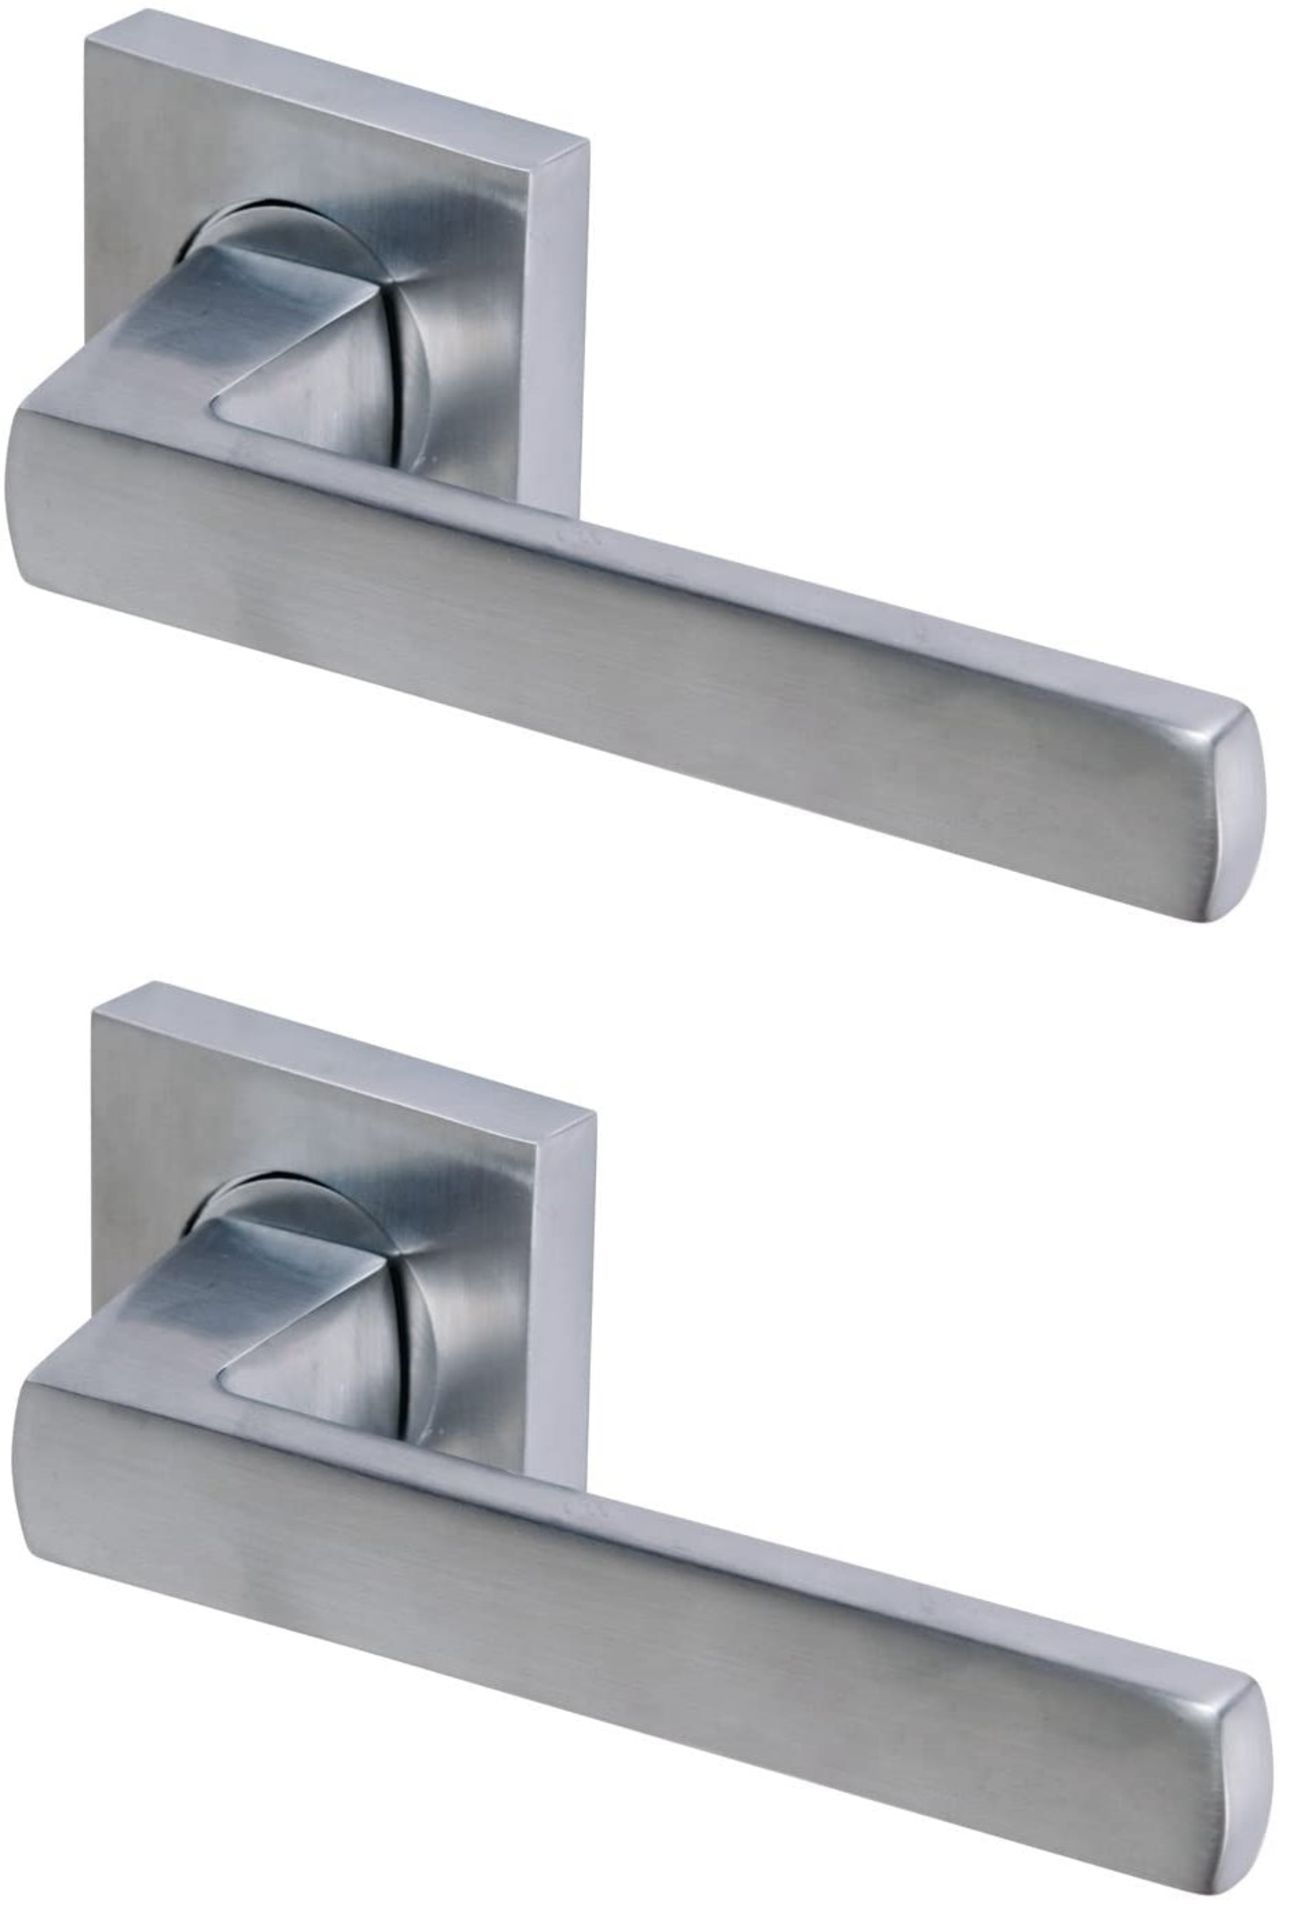 2 x Pairs of Sorrento Axis Internal Door Handle Levers With Square Rose in Polished Chrome - Brand